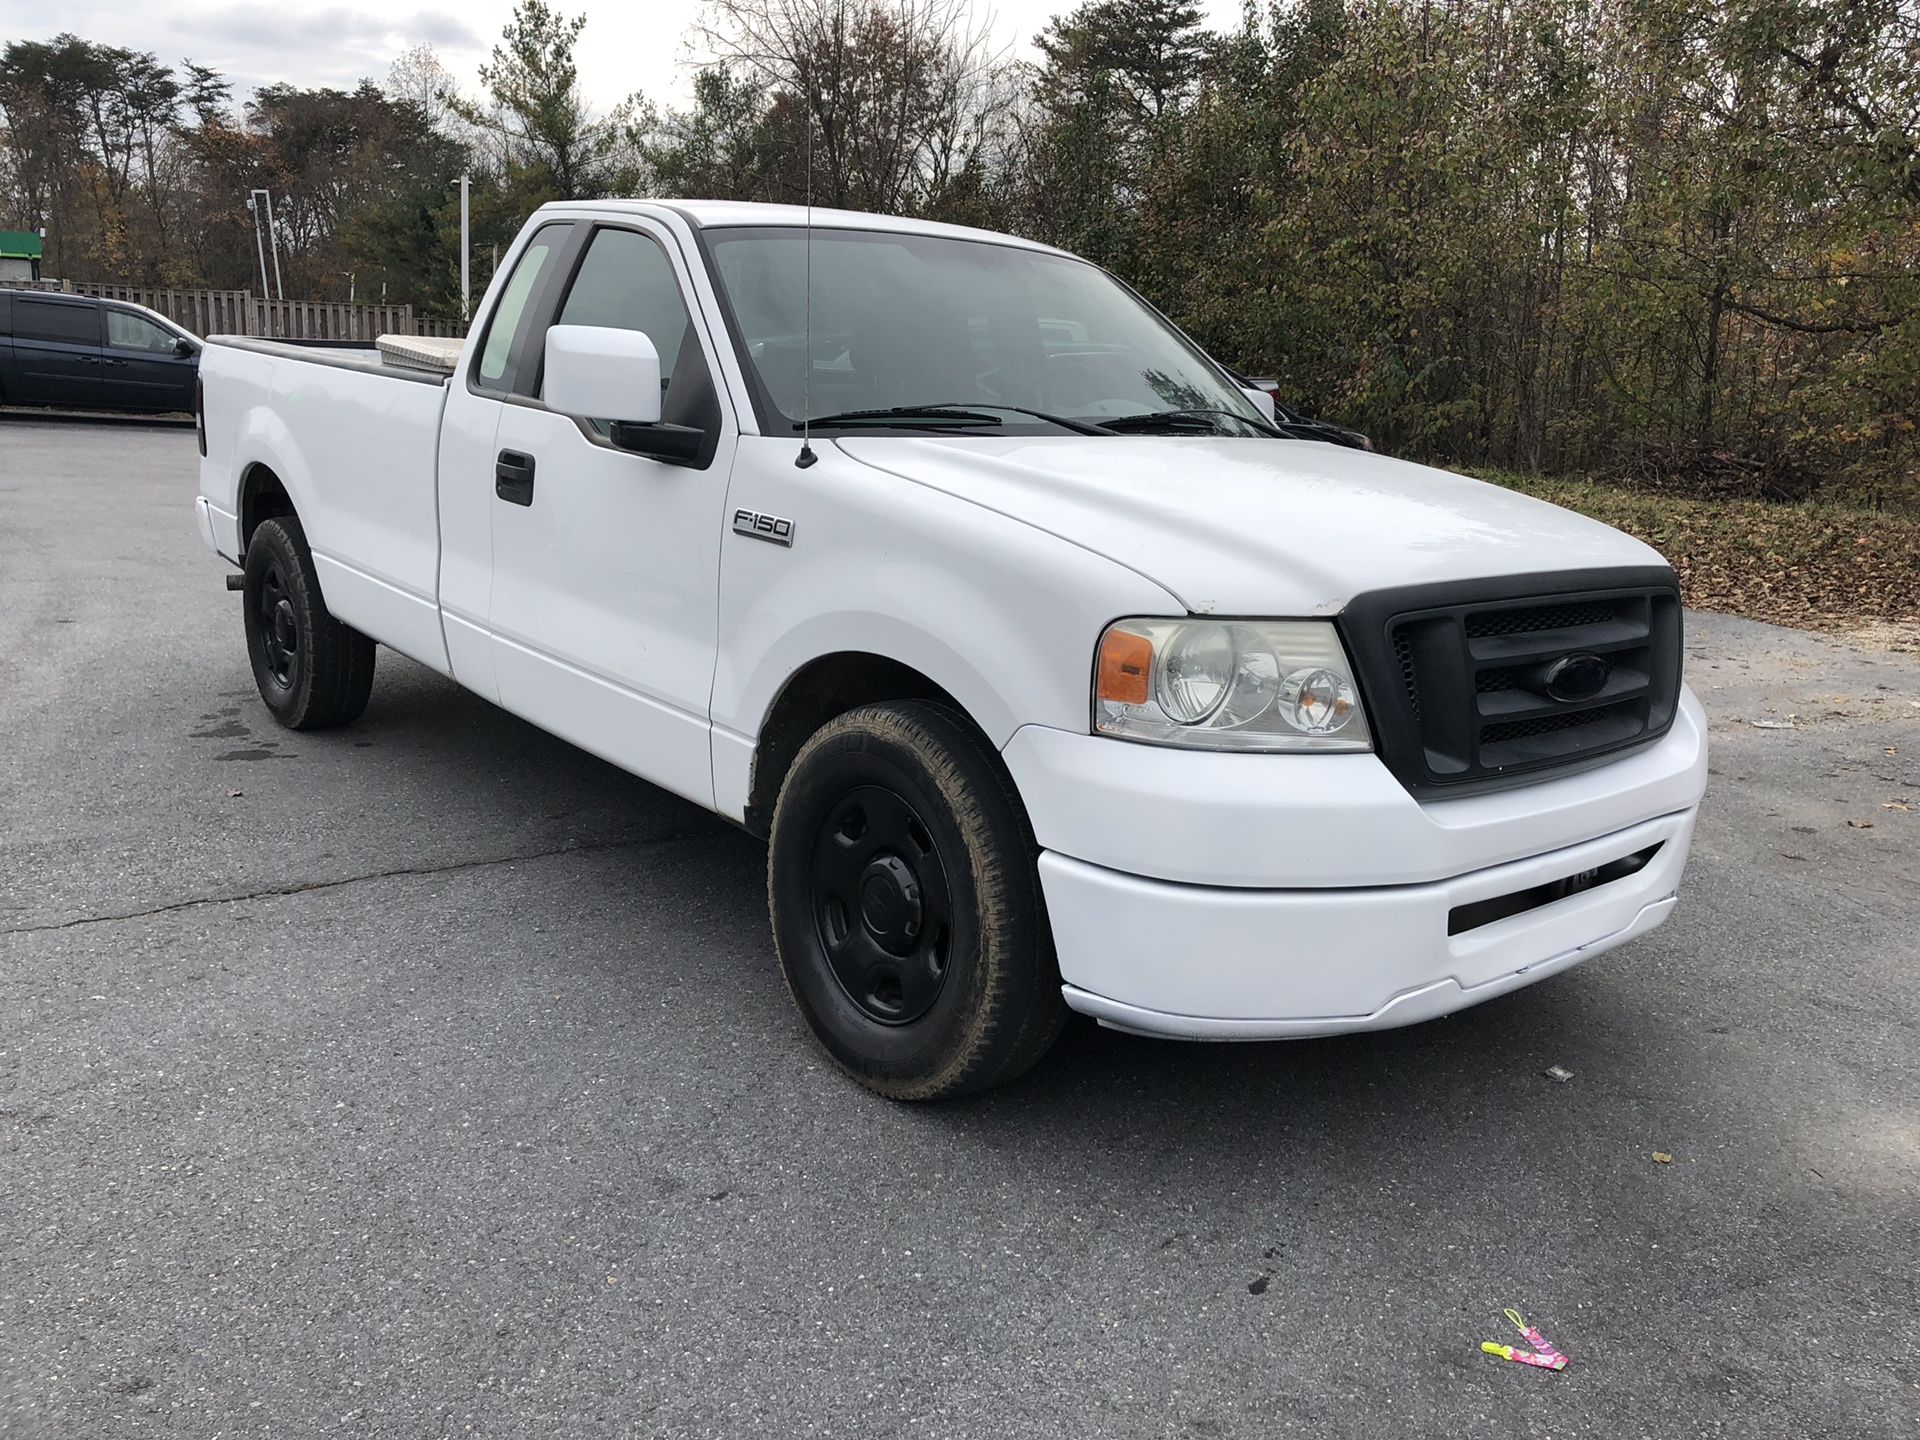 2007 Ford F-150 running’s great